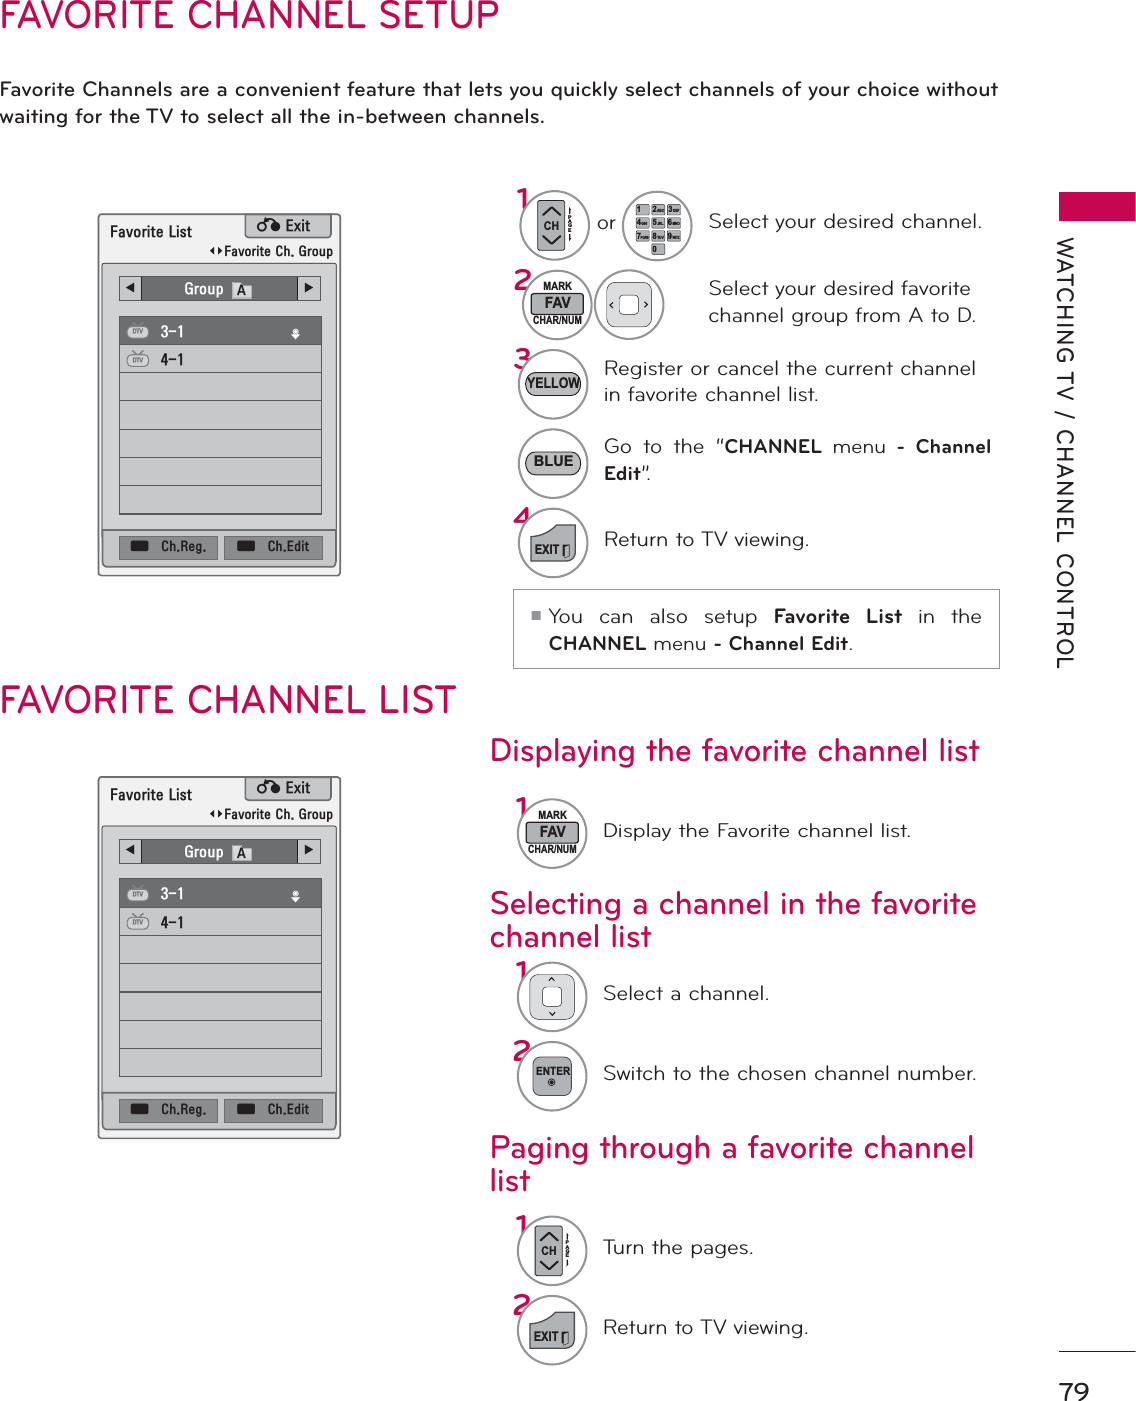 79WATCHING TV / CHANNEL CONTROLFAVORITE CHANNEL SETUPFavorite Channels are a convenient feature that lets you quickly select channels of your choice without waiting for the TV to select all the in-between channels.1FAVMARKCHAR/NUMDisplay the Favorite channel list.1Select a channel.2ENTERSwitch to the chosen channel number.1CHPAGETurn the pages.2EXITReturn to TV viewing.ᯚᯛ)DYRULWH&amp;K*URXSᯚᯛ)DYRULWH&amp;K*URXS)DYRULWH/LVW)DYRULWH/LVWᰙ([LWᰙ([LW܁*URXSA۽܁*URXSA۽DTVDTVDTVDTVᯕ&amp;K5HJᯕ&amp;K5HJᯕ&amp;K(GLWᯕ&amp;K(GLWFAVORITE CHANNEL LISTSelecting a channel in the favorite channel listPaging through a favorite channel listDisplaying the favorite channel list12ABC3 DEF4 GHI5JKL6MNO7PQRS8 TUV09WXYZ1orCHPAGESelect your desired channel.2FAVMARKCHAR/NUMSelect your desired favorite channel group from A to D.3Register or cancel the current channel in favorite channel list.Go to the “CHANNEL menu - ChannelEdit”.4EXITReturn to TV viewing.YELLOWBLUEᯫYou can also setup Favorite List in the CHANNEL menu - Channel Edit.ᯱᯙᯱᯙ